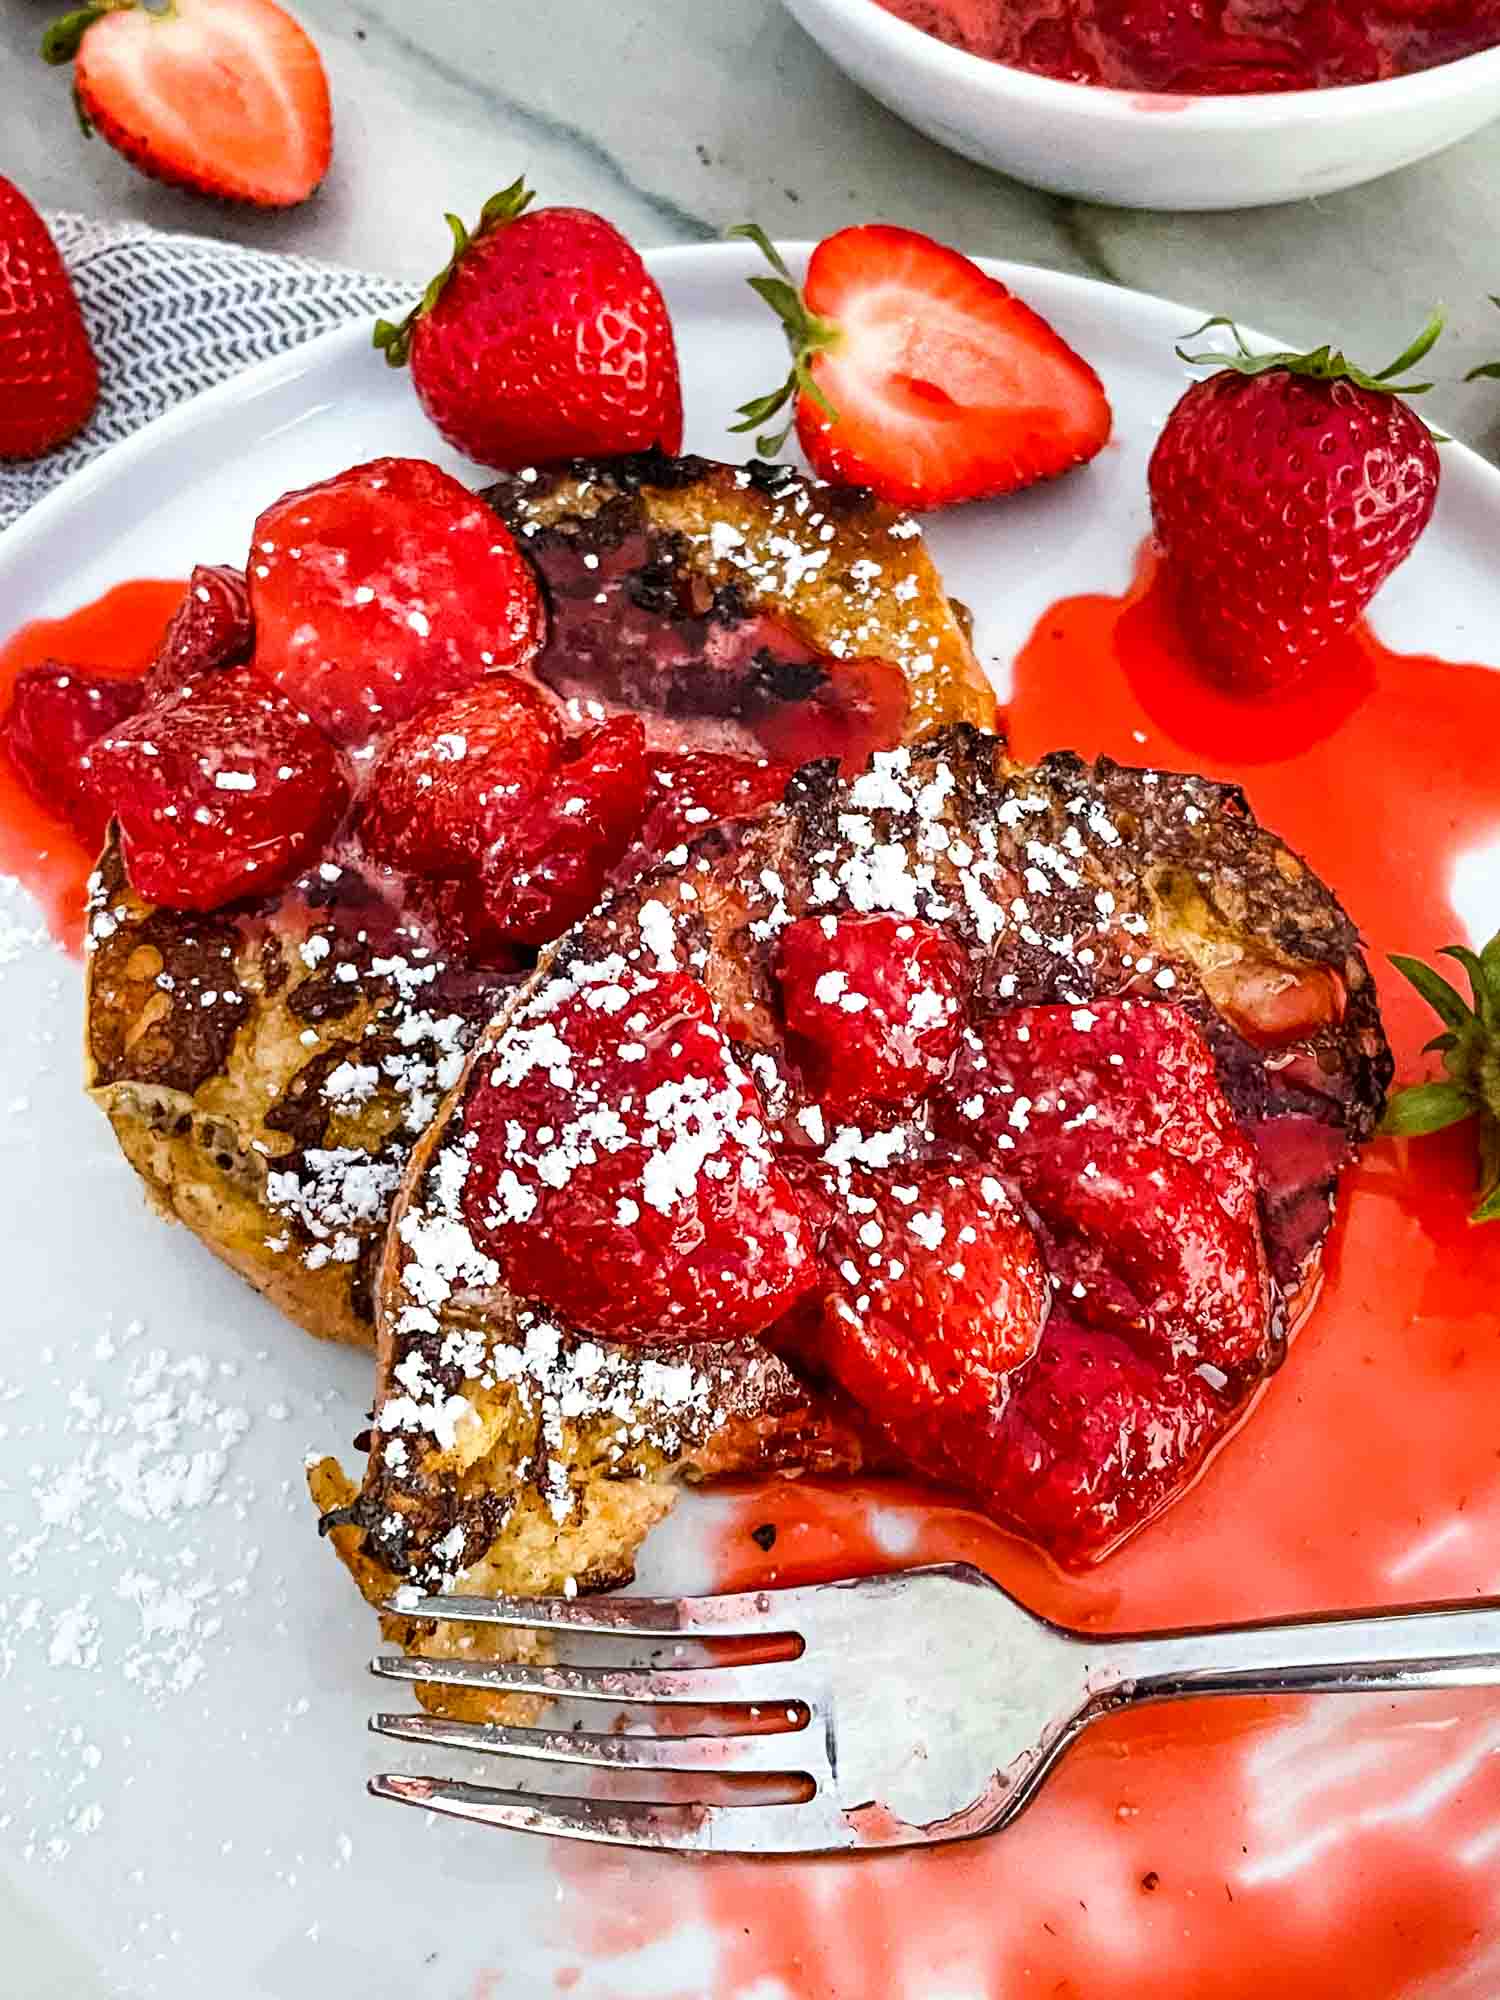 A fork digging into Strawberry French Toast on a white plate